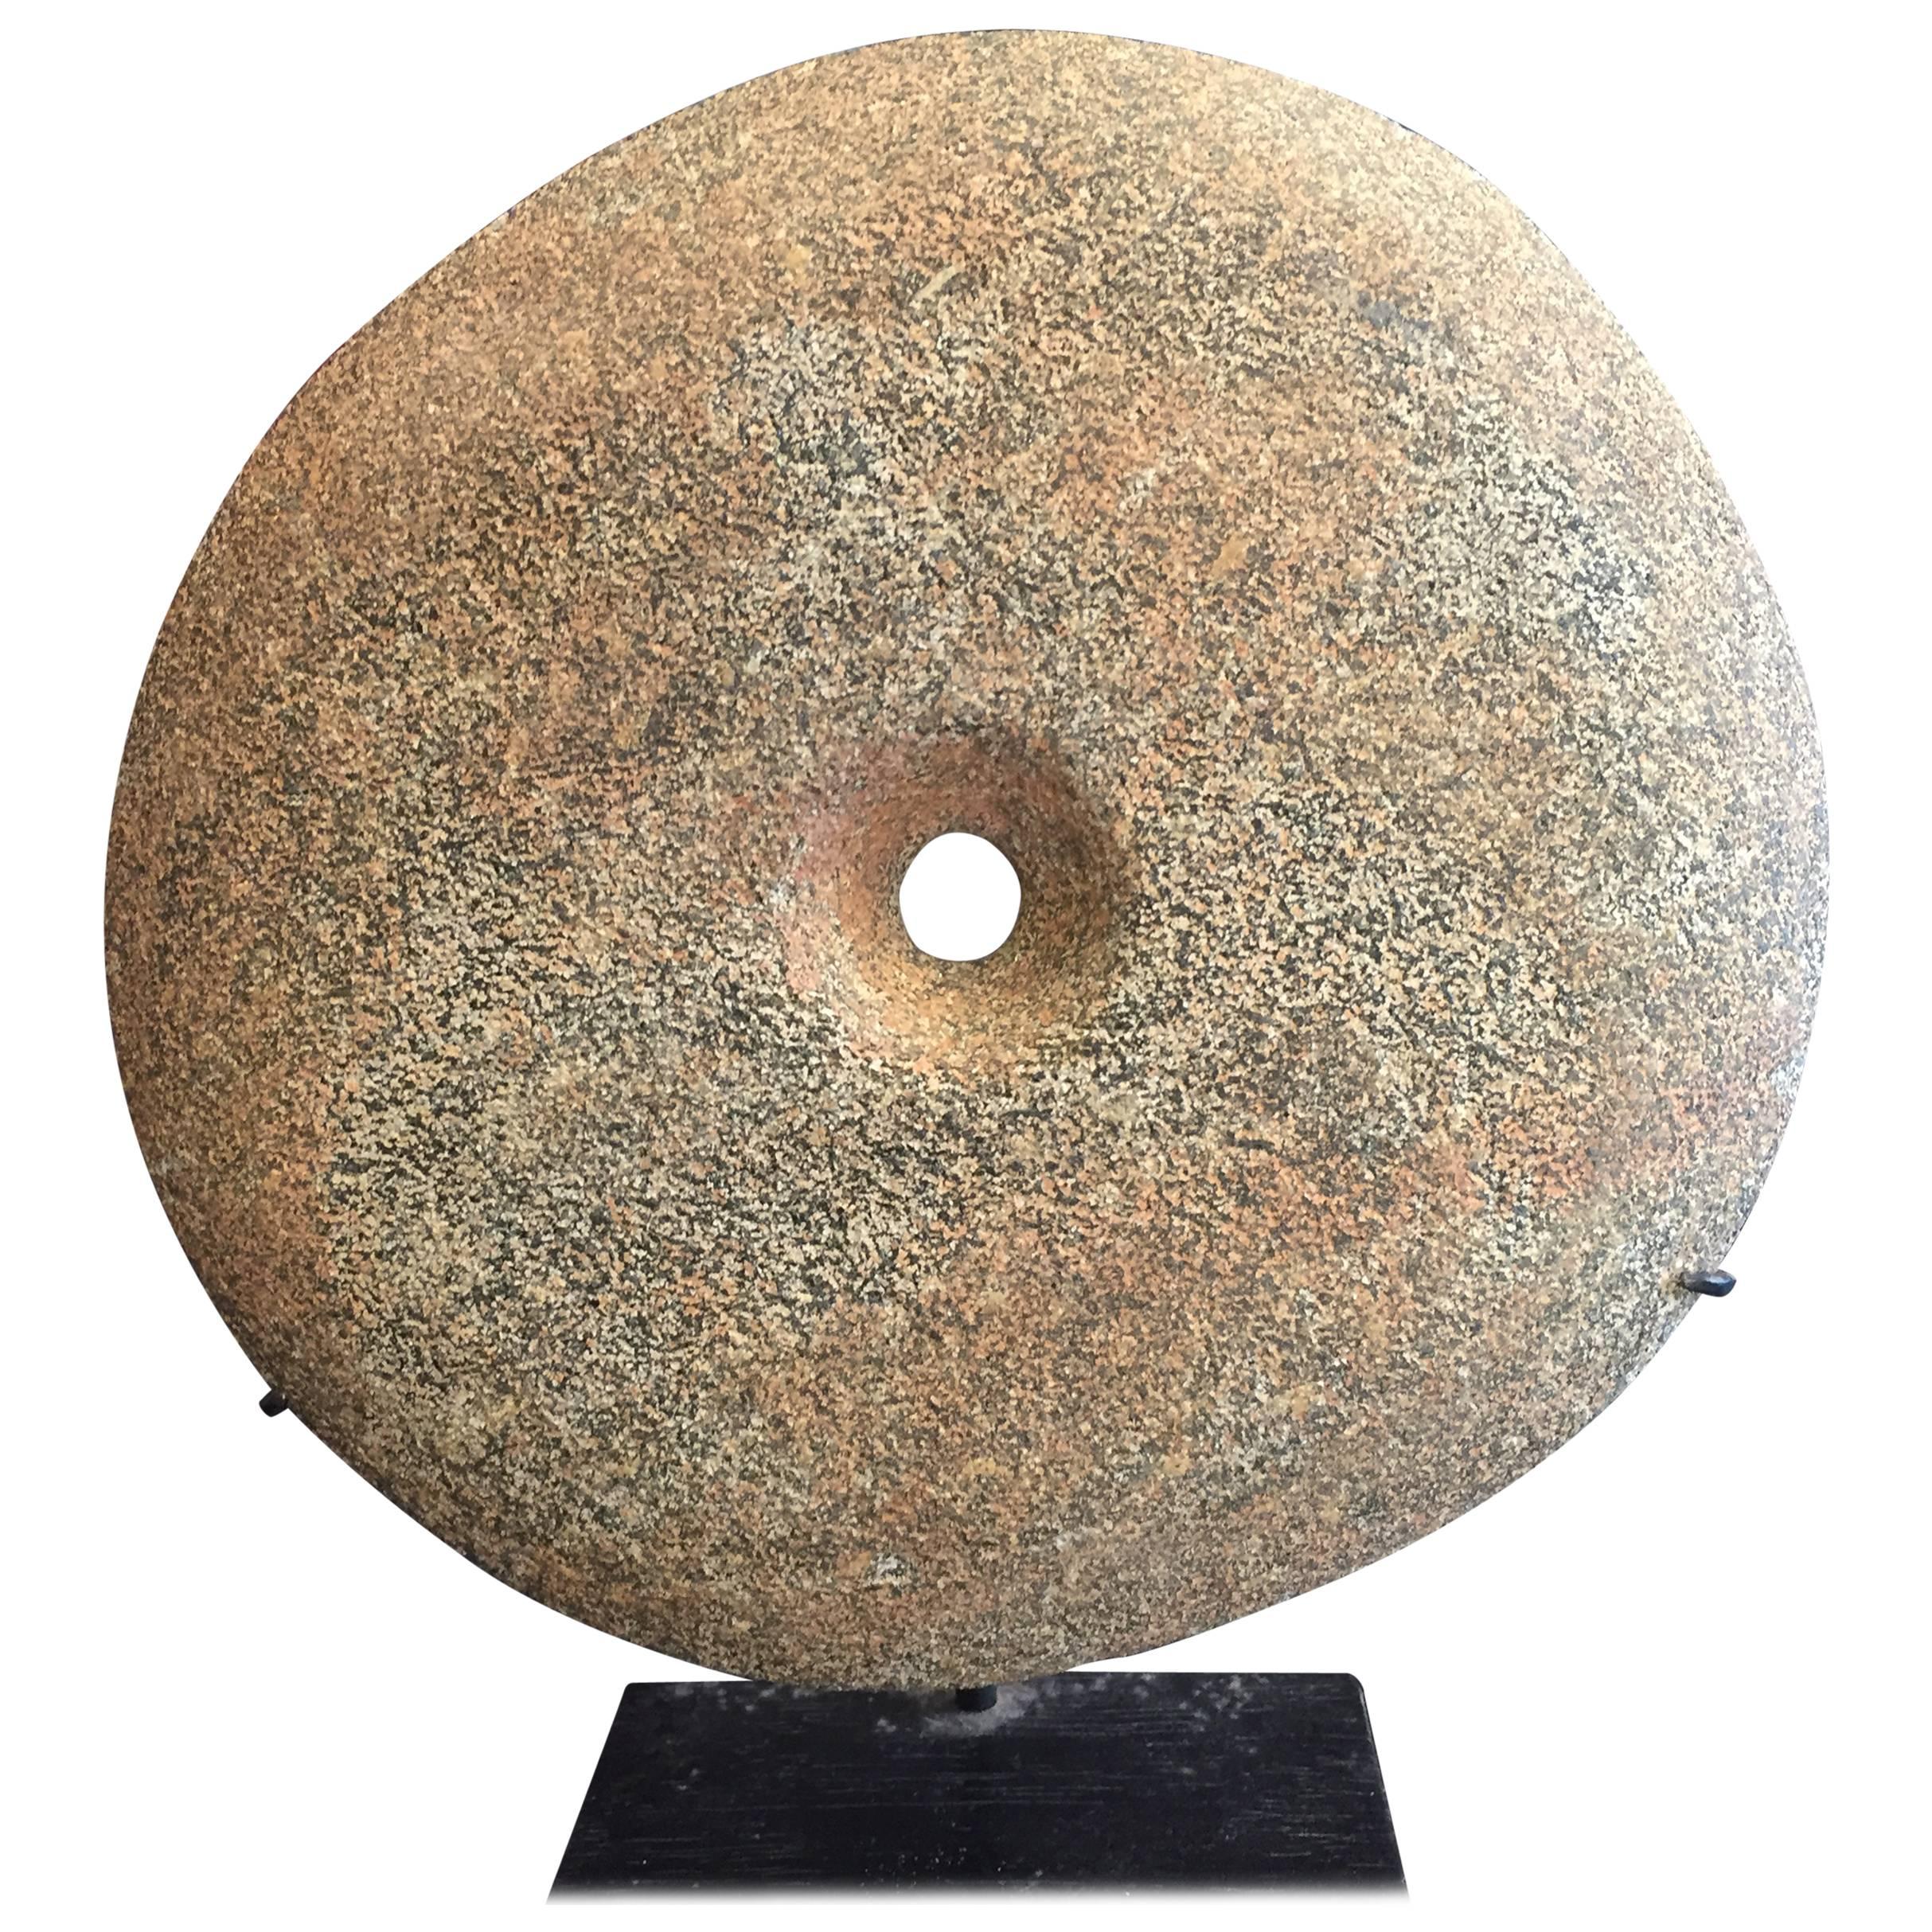 Ancient Stone Bi Disc from Early Africa Private Collection with Custom Stand